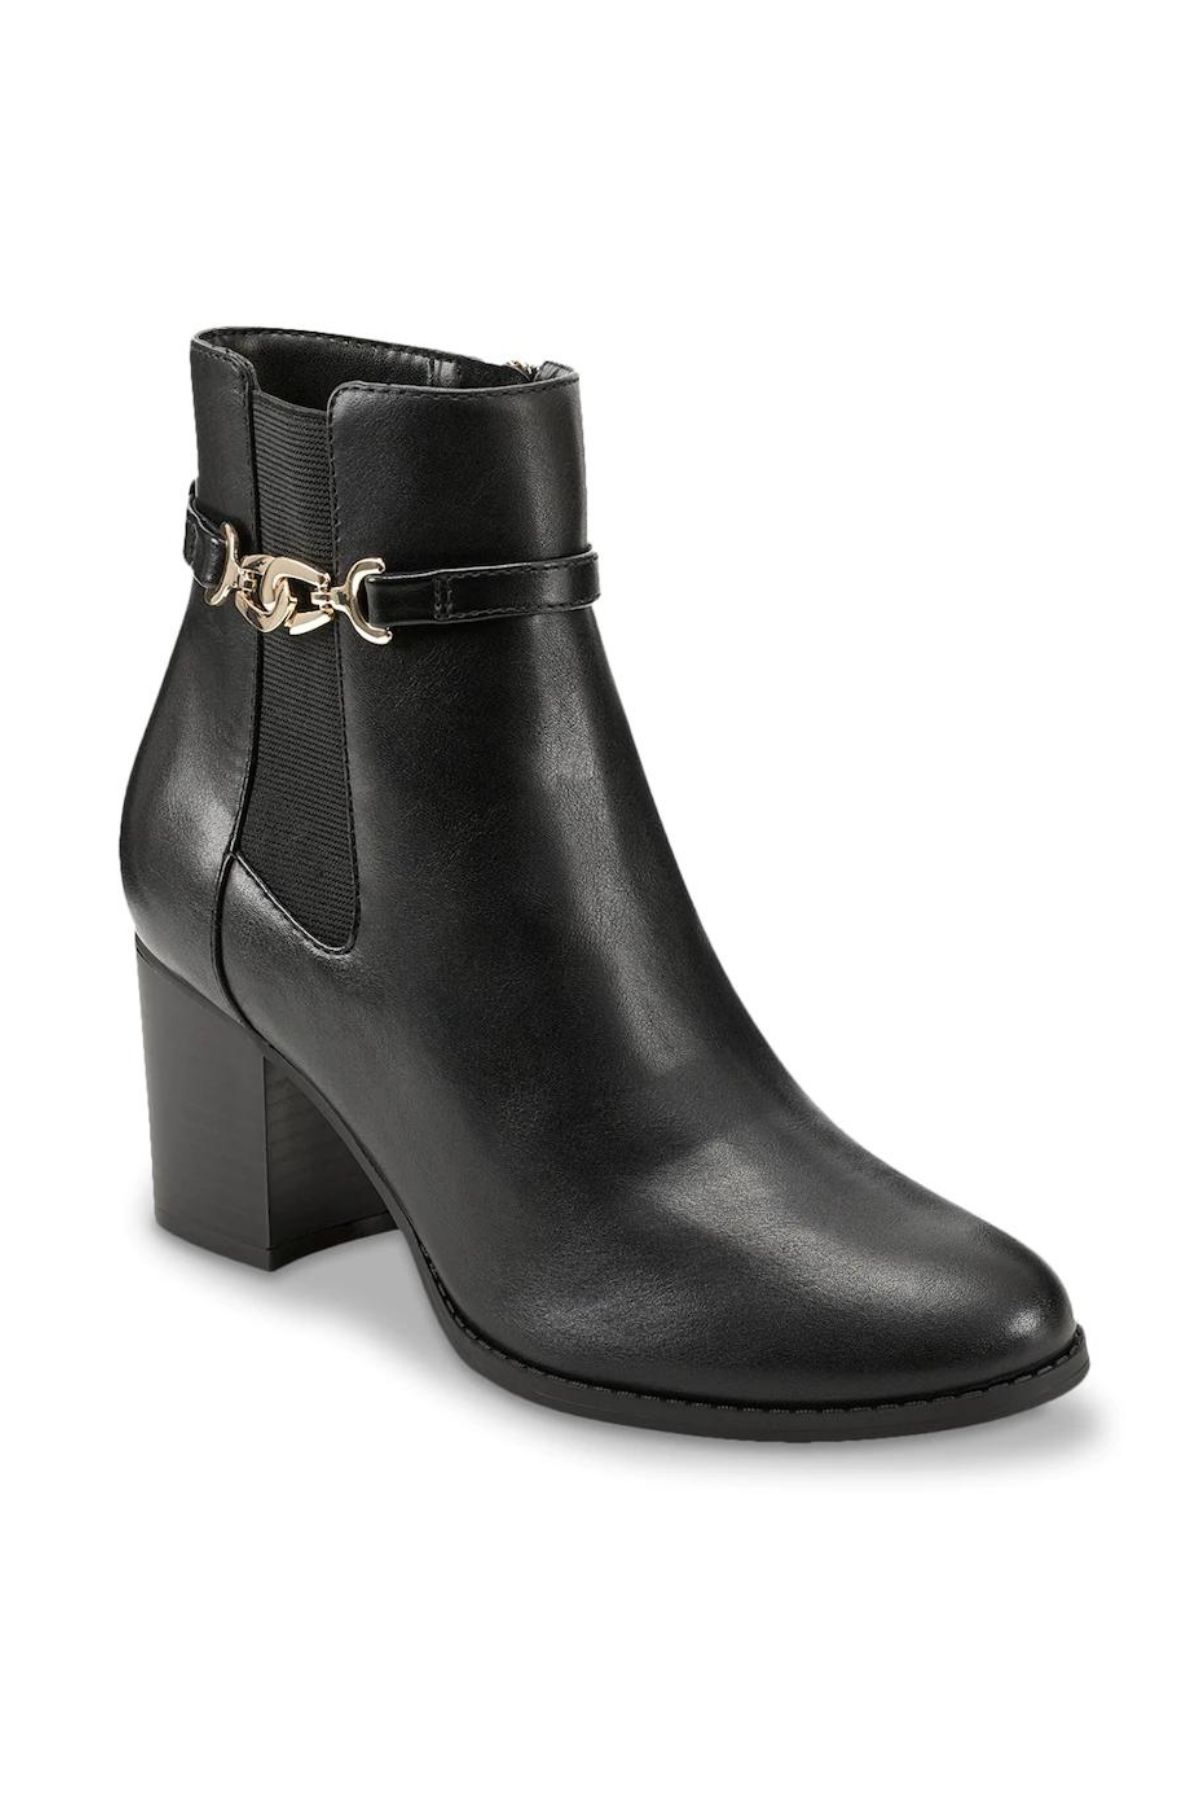 black heeled Chelsea boots with golden chain on the side